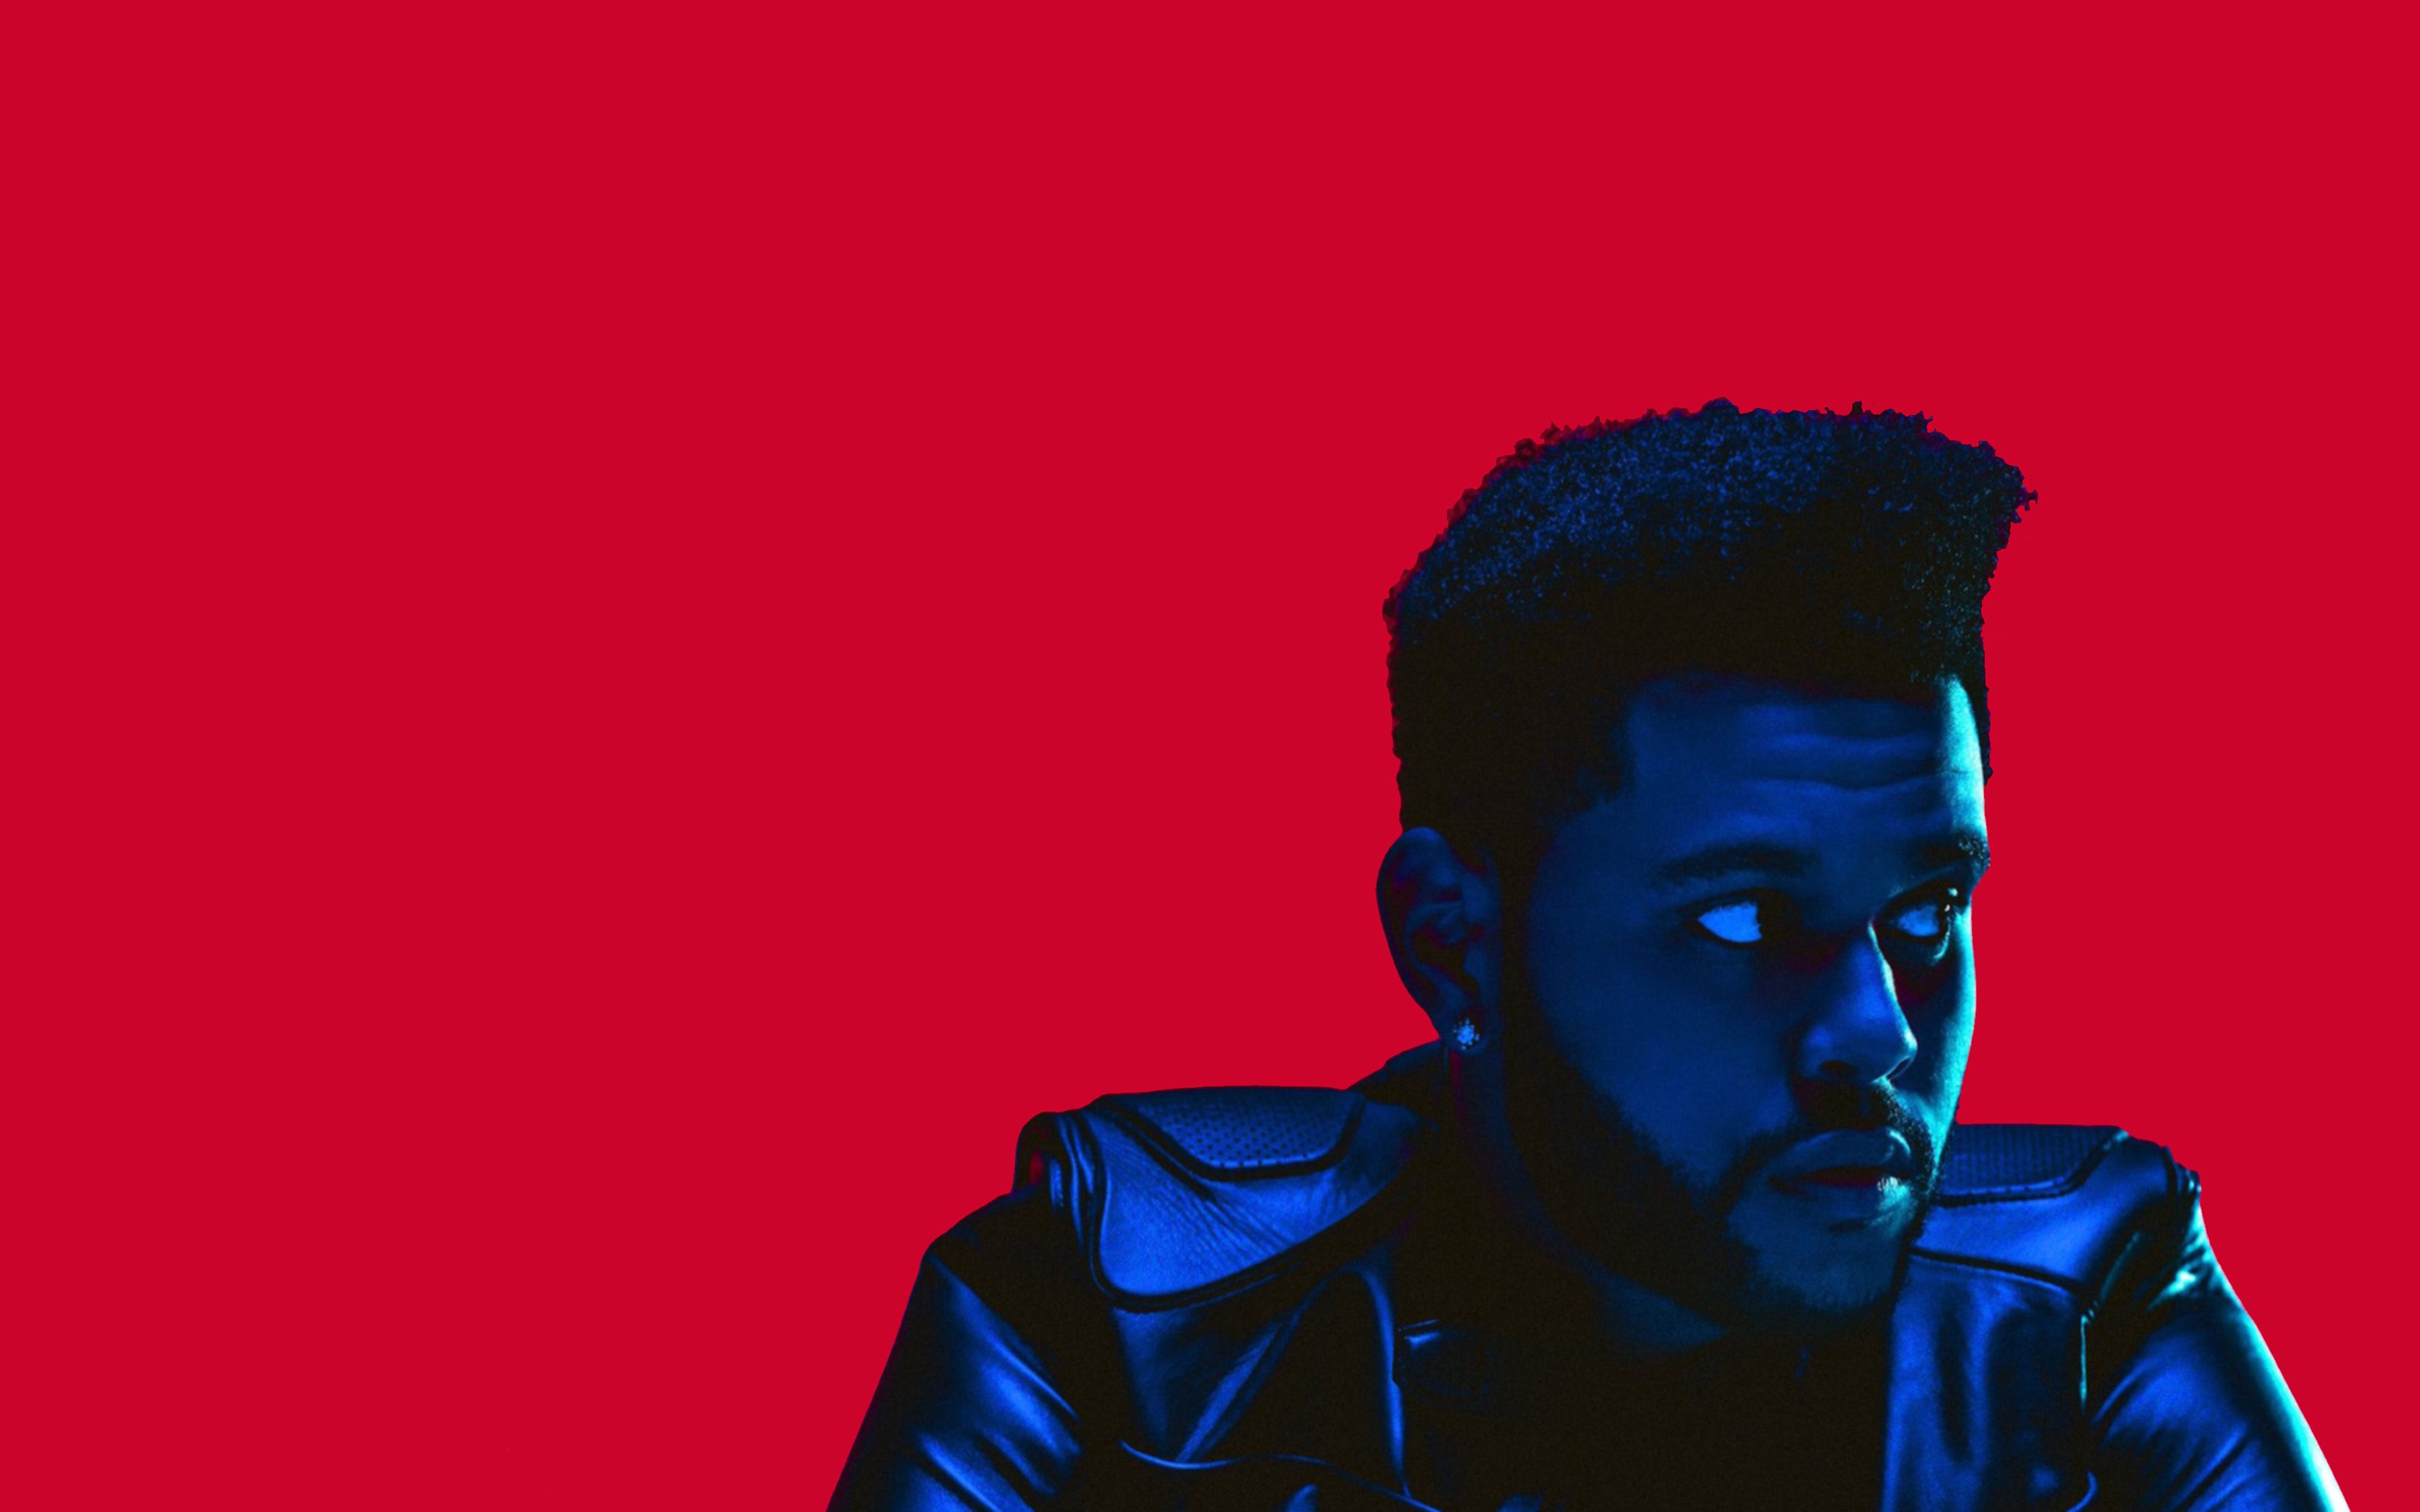 Live for the weekend. The Weeknd. Abel the Weeknd. The Weeknd 2022. The Weeknd фото.